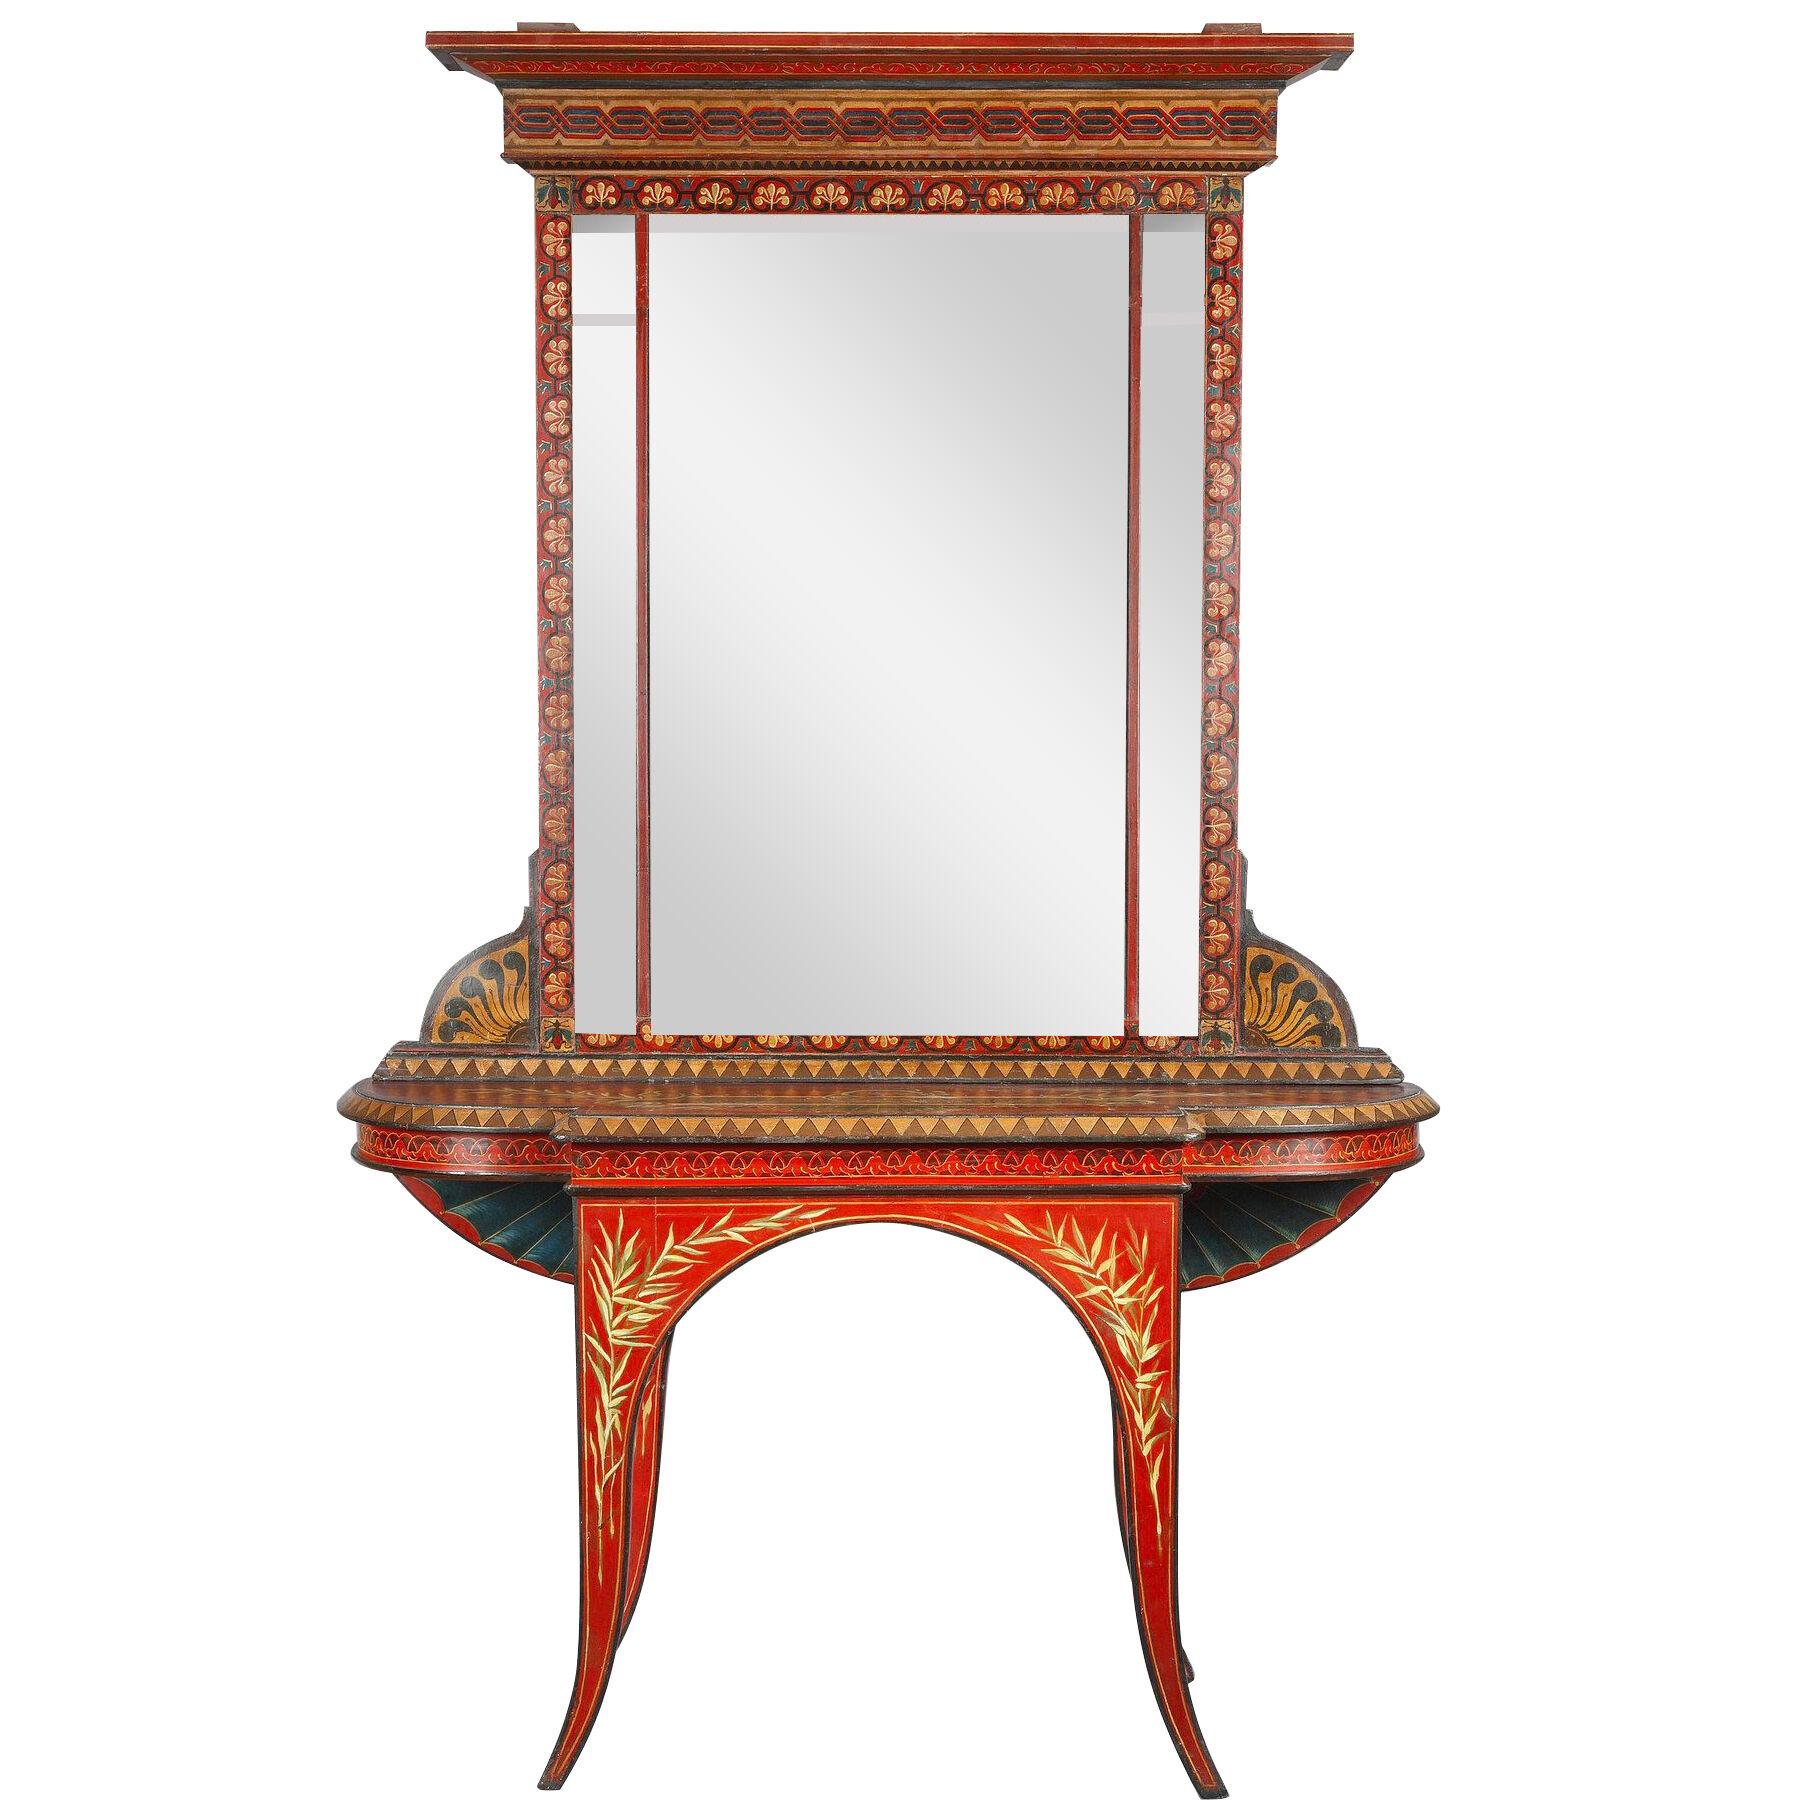 Rare Neo-Pompeian Polychrome Console and its Mirror, Probably Italy, Circa 1890